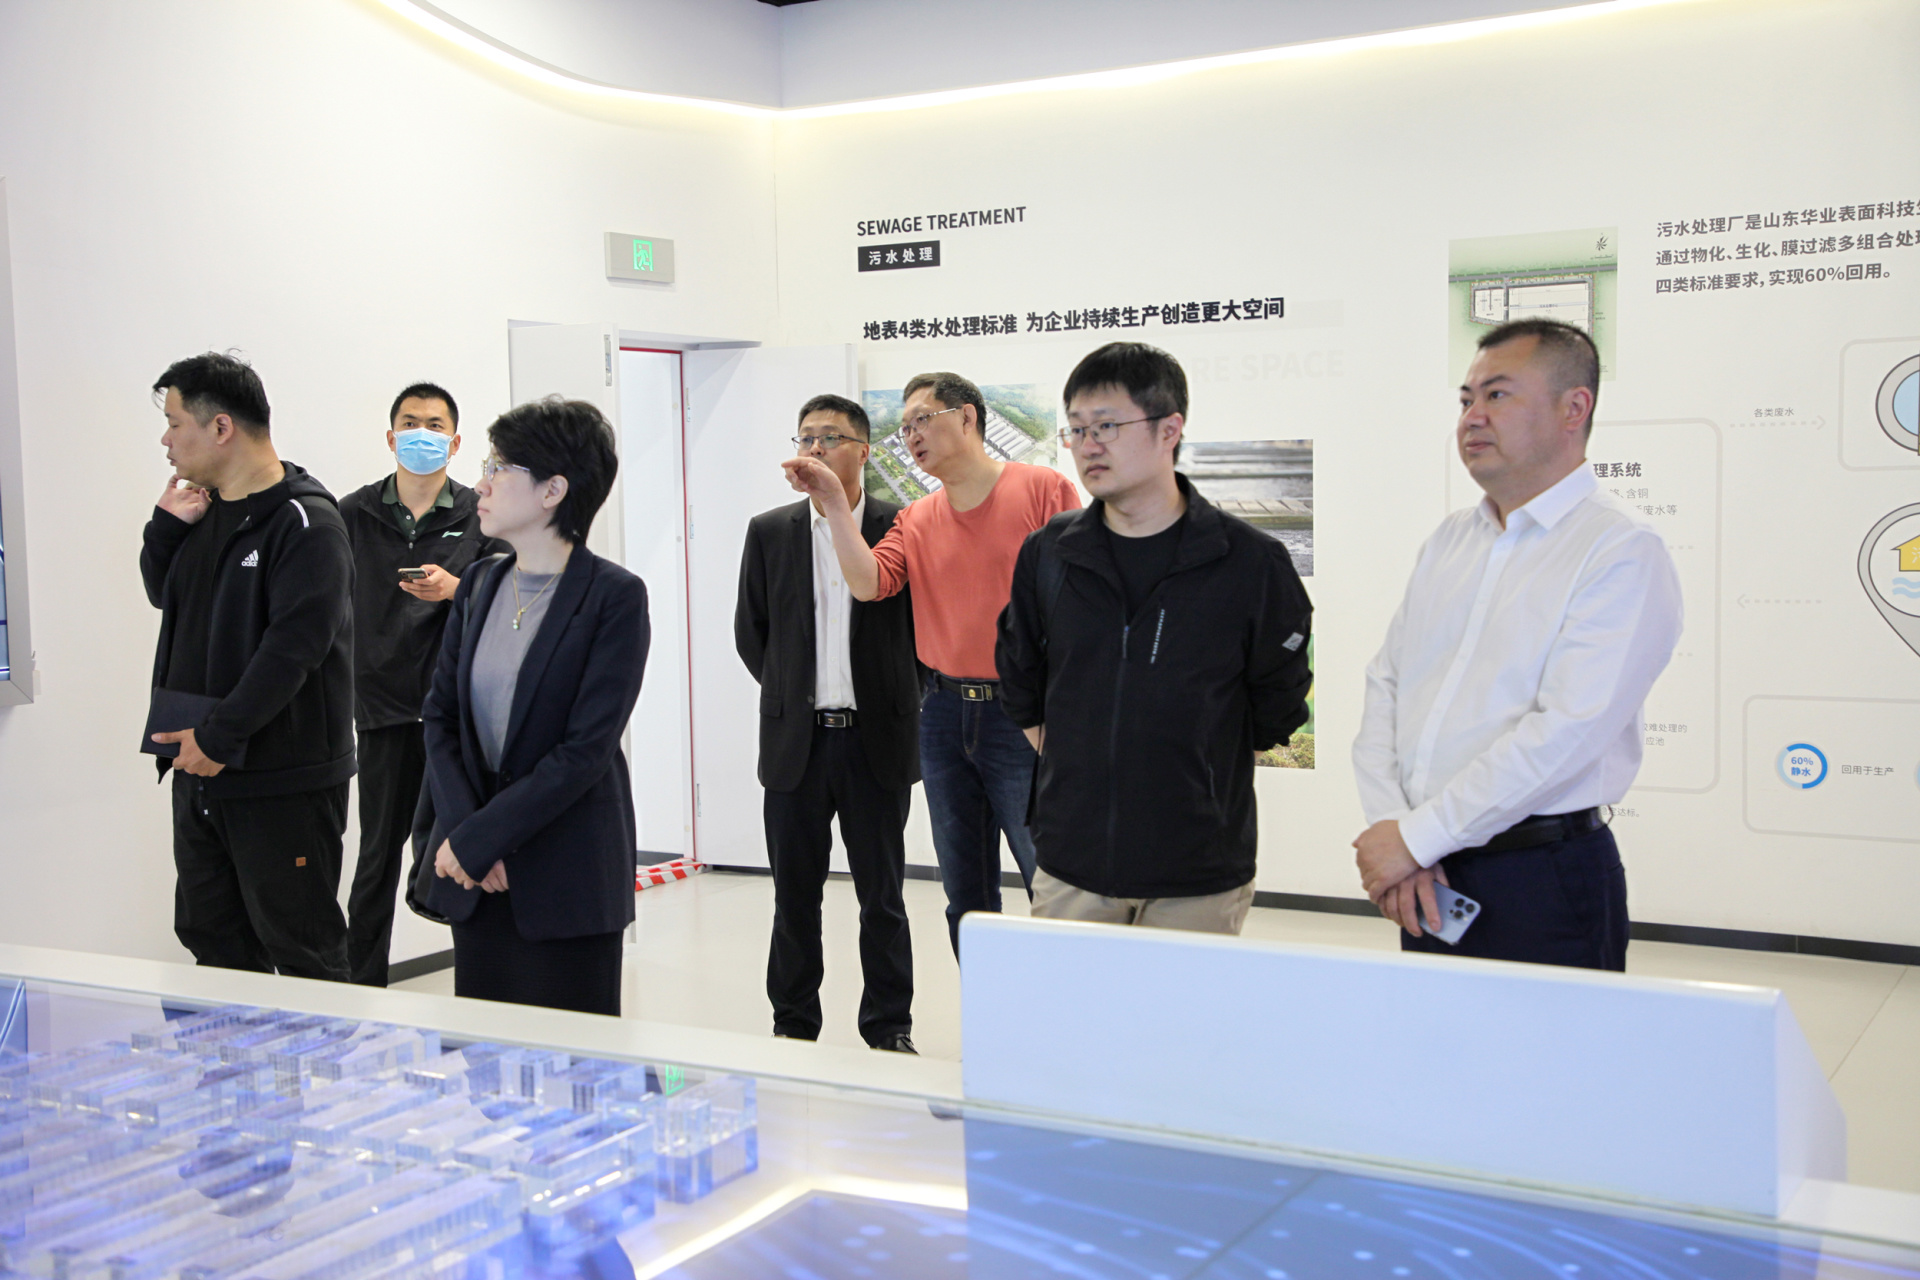 Li Ying and his delegation from CICC Capital Operations Co., Ltd. visited Shandong Huaye Lulan Surface Technology Ecological Demonstration Park for inspection and exchange